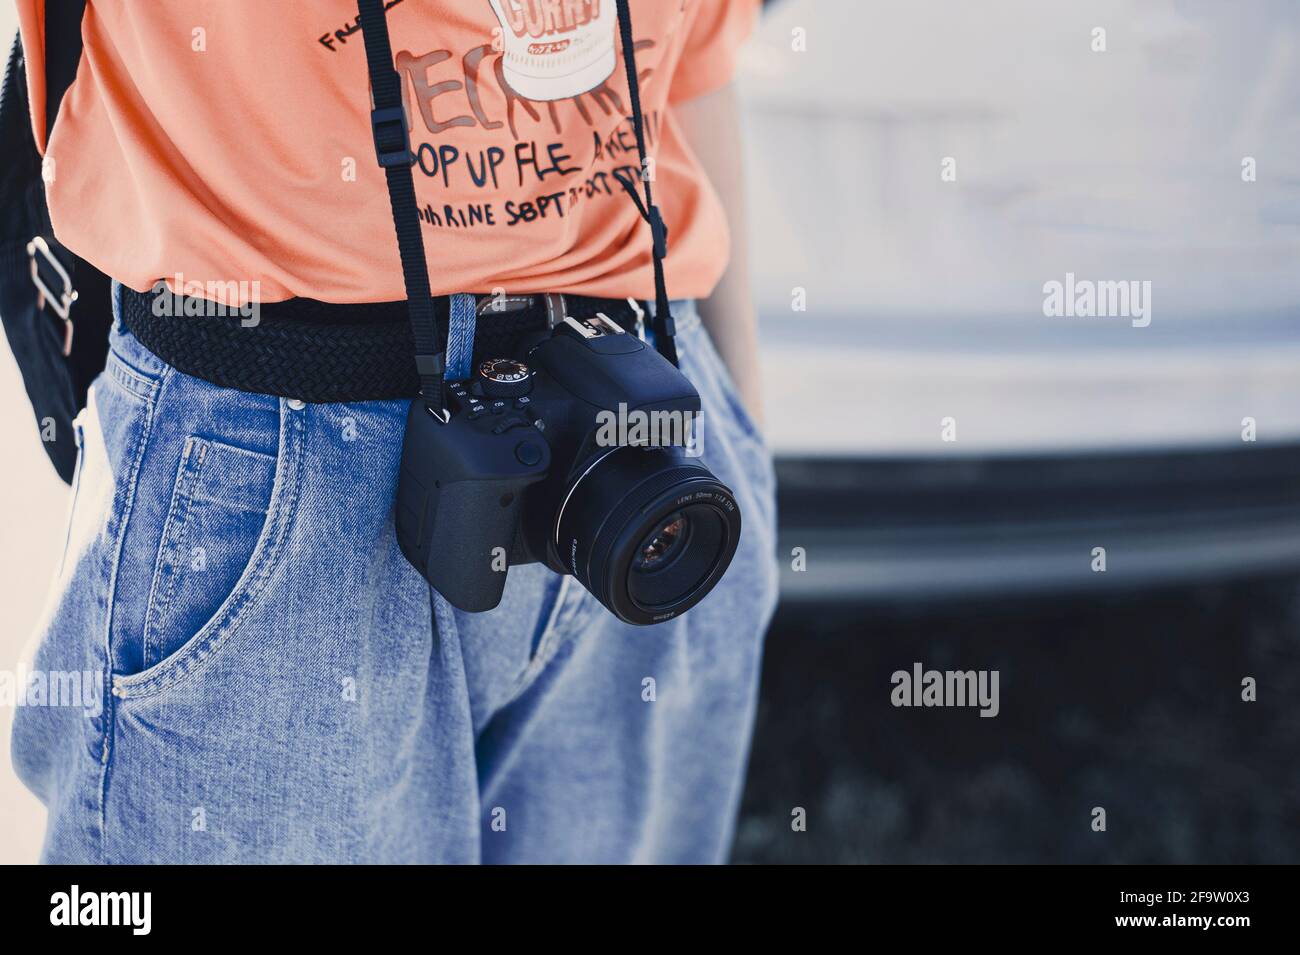 No face photo of young skinny girl with a camera on a belt  Stock Photo